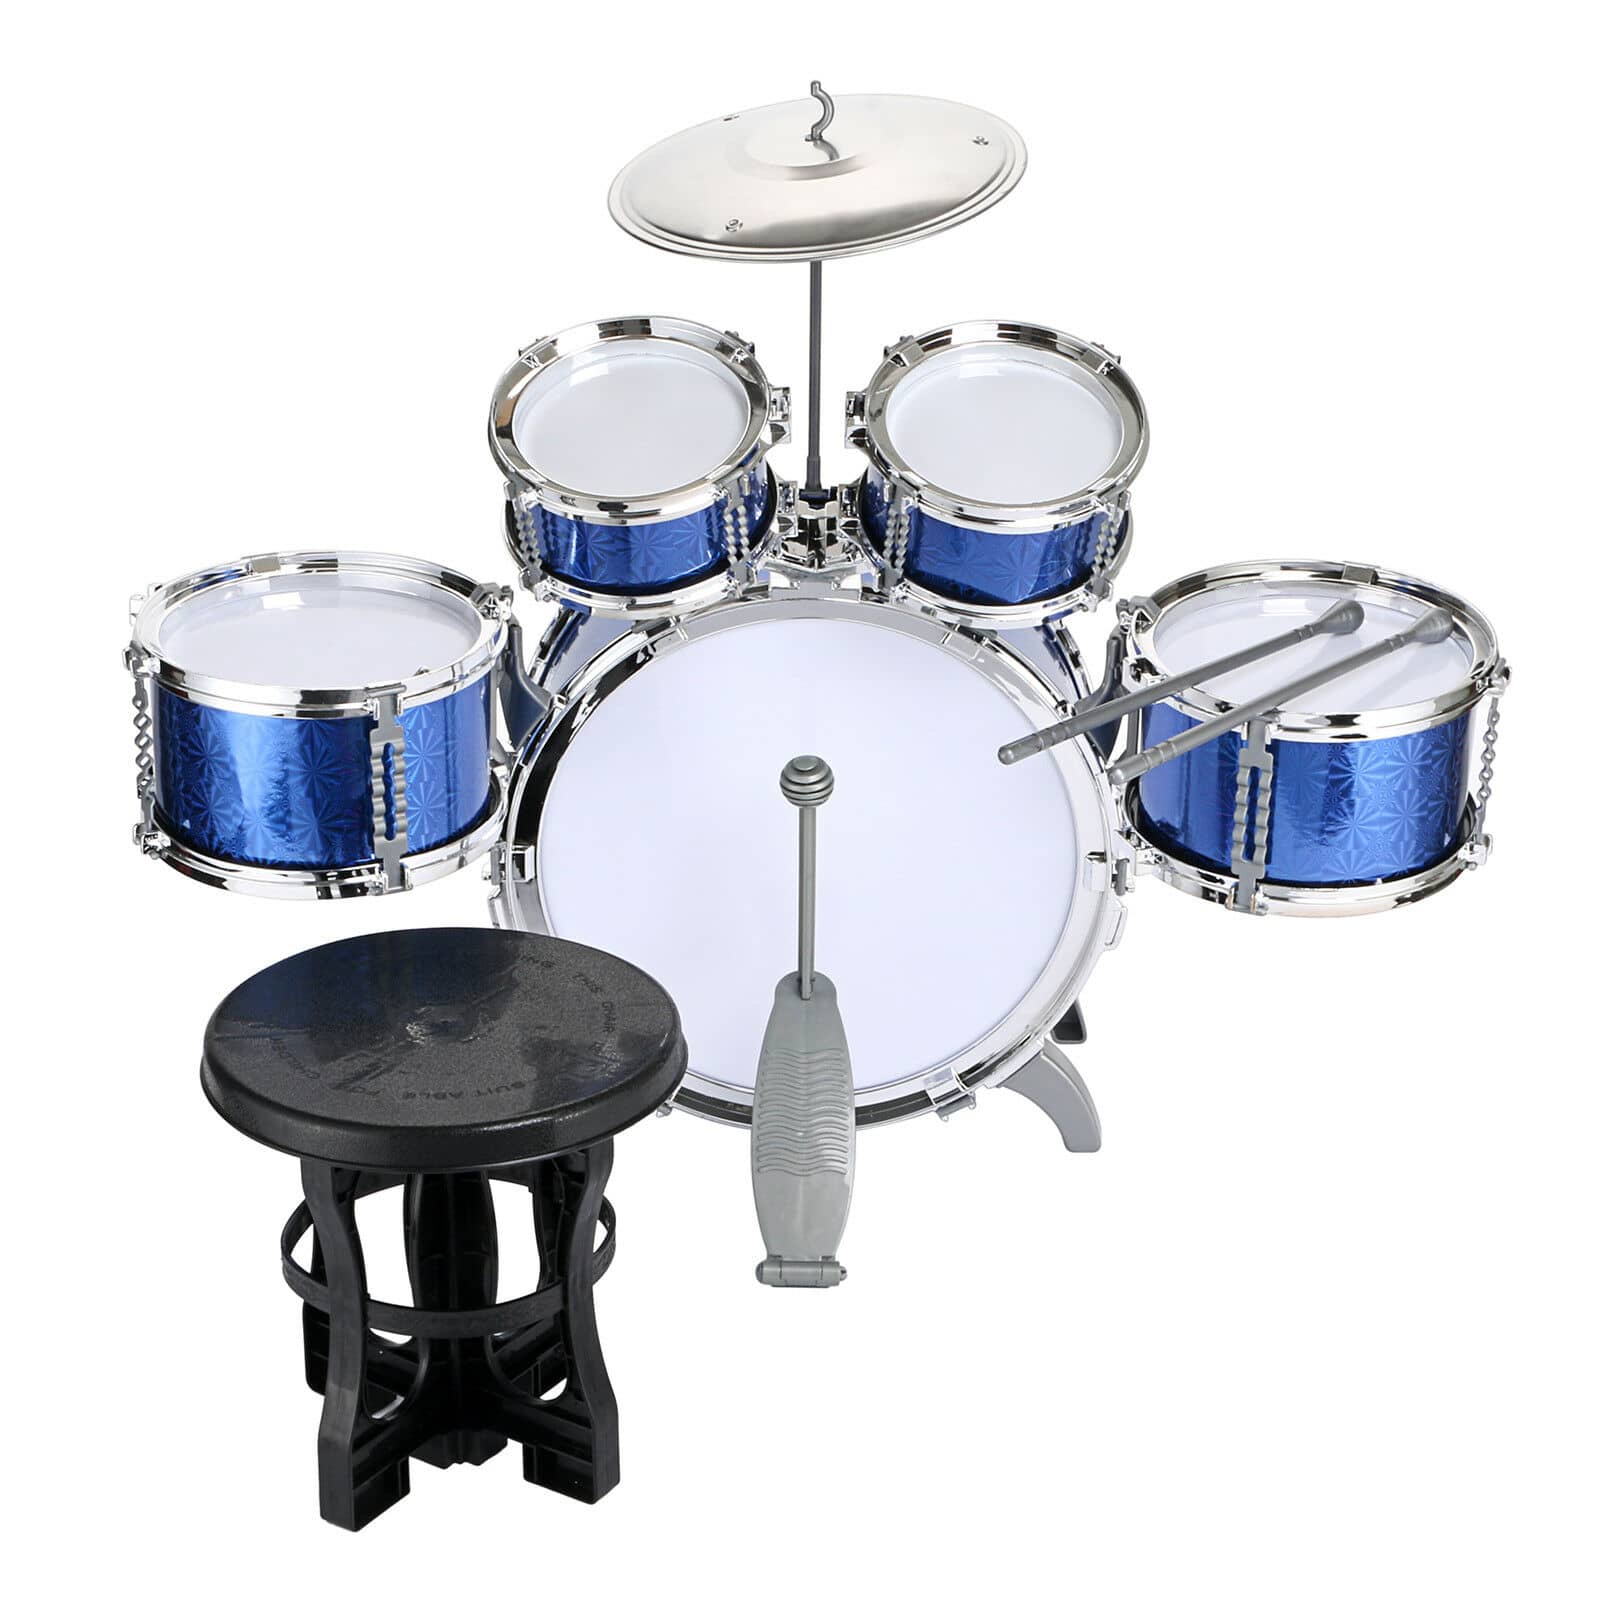 Children Kids Jazz Drum Set Kit Musical Educational Instrument Toy 3/5/6 Drums + 1 Cymbal with Small Stool Drum Sticks for Kids|Drum 4